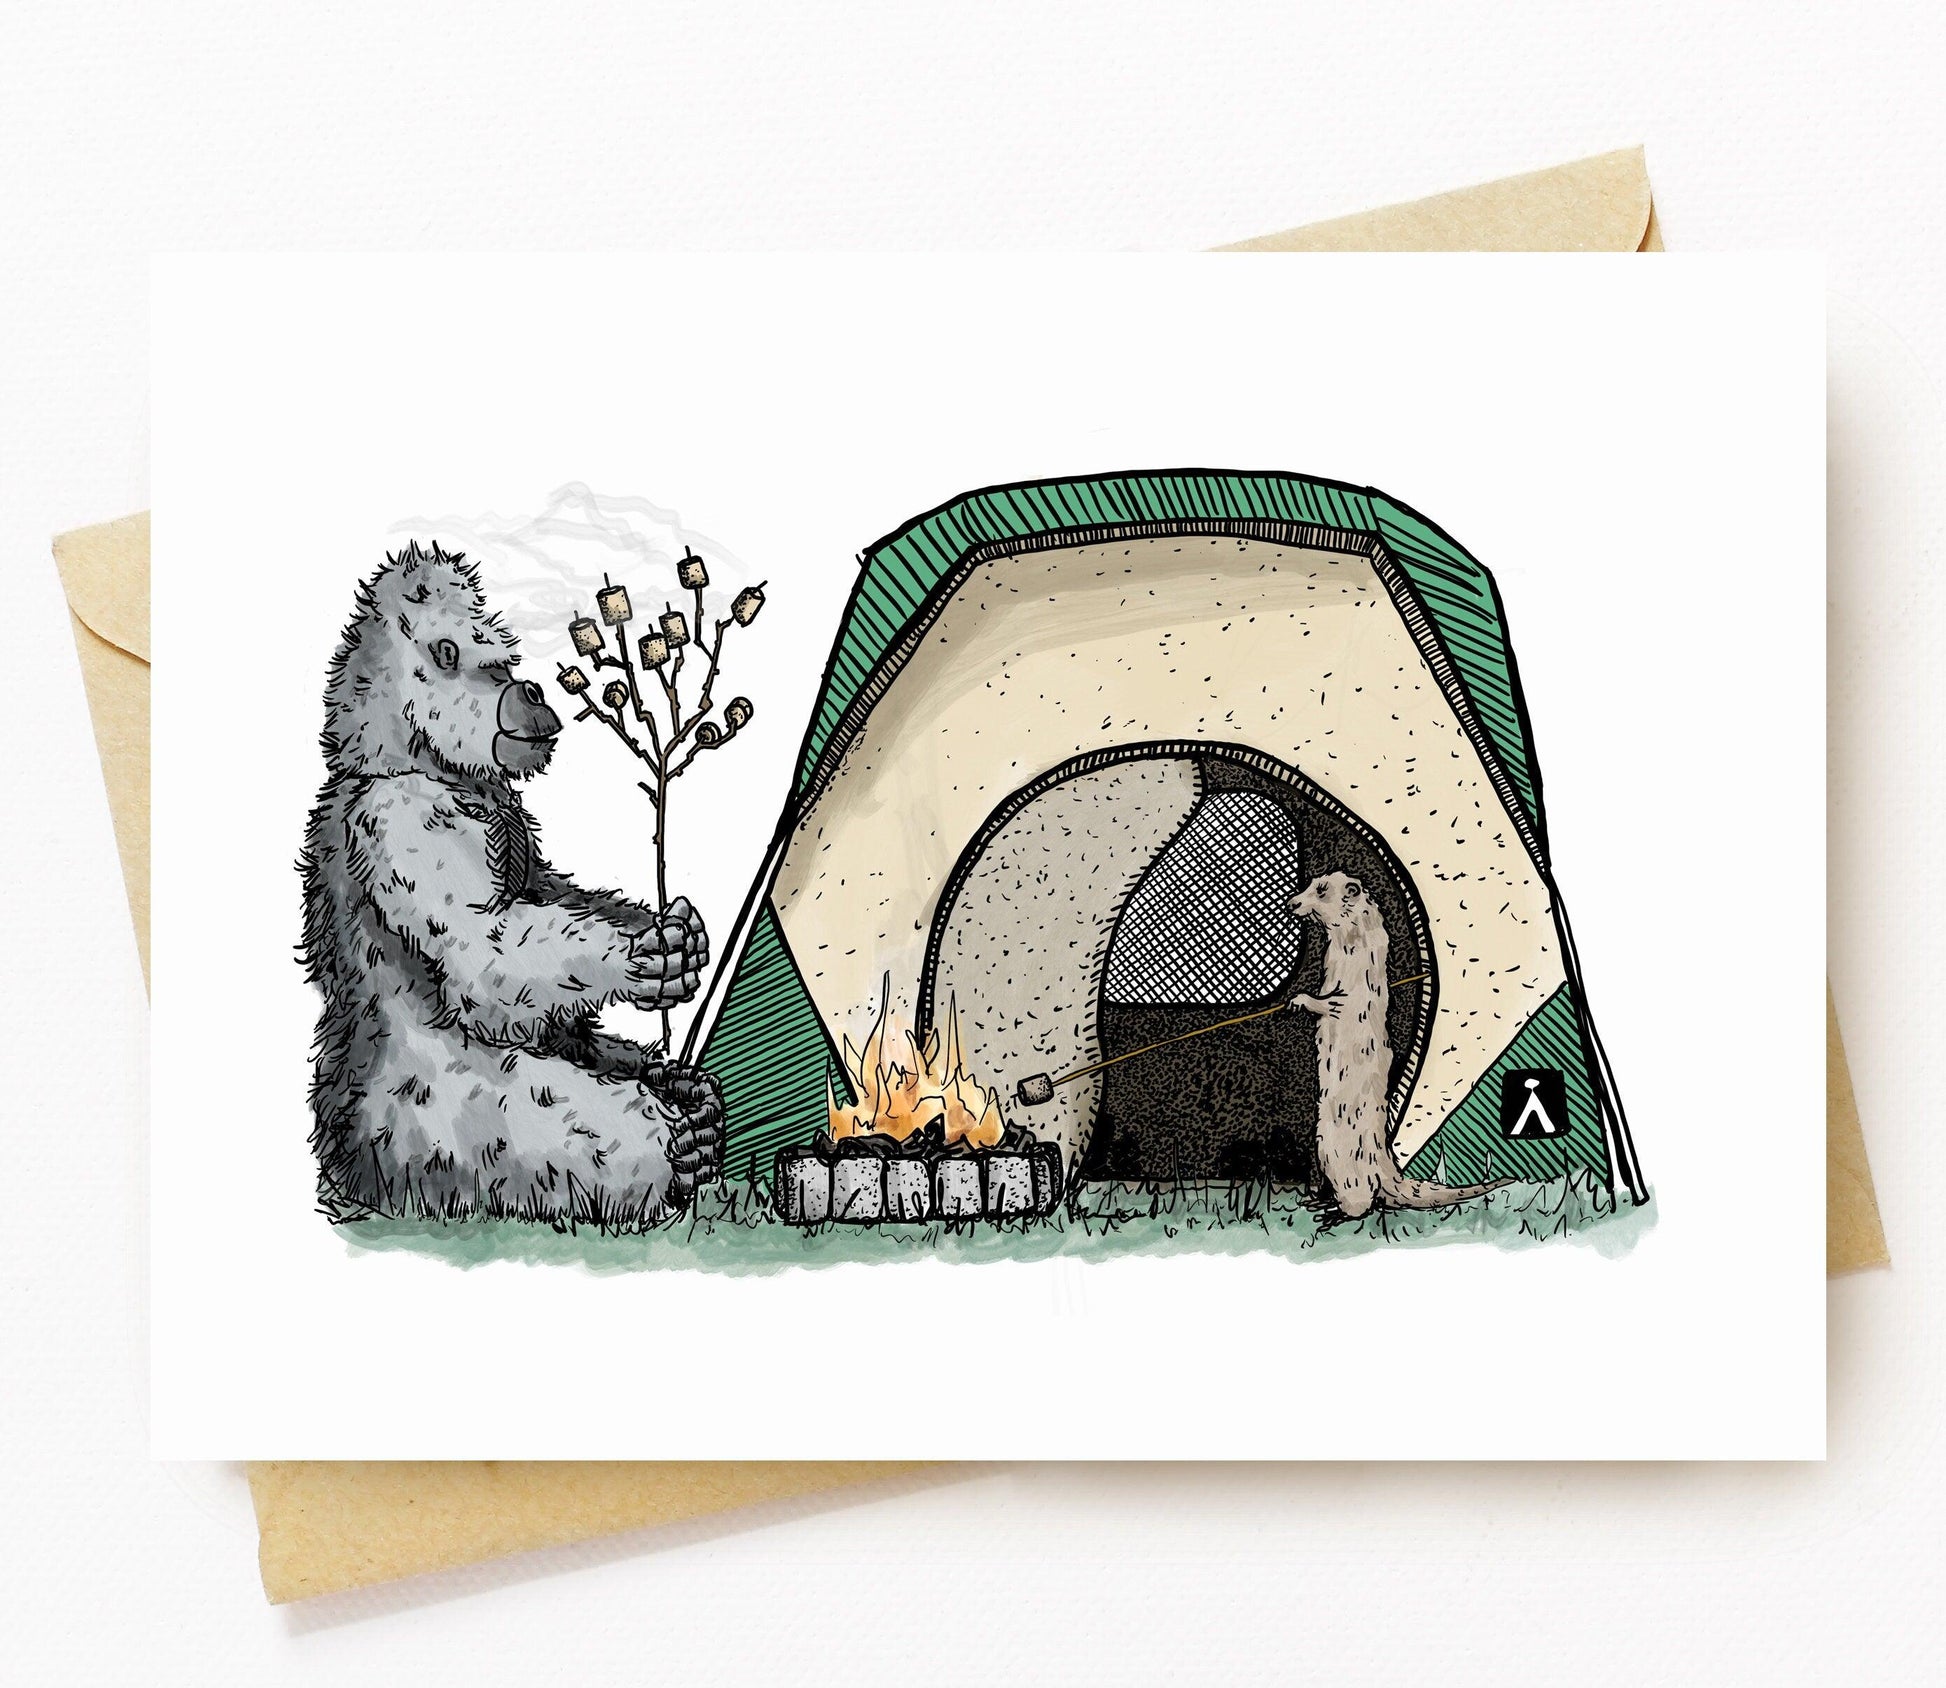 BellavanceInk: Greeting Card With Pen & Ink Drawing of a Gorilla And An Otter Roasting Marshmallows While Camping  5 x 7 Inches - BellavanceInk